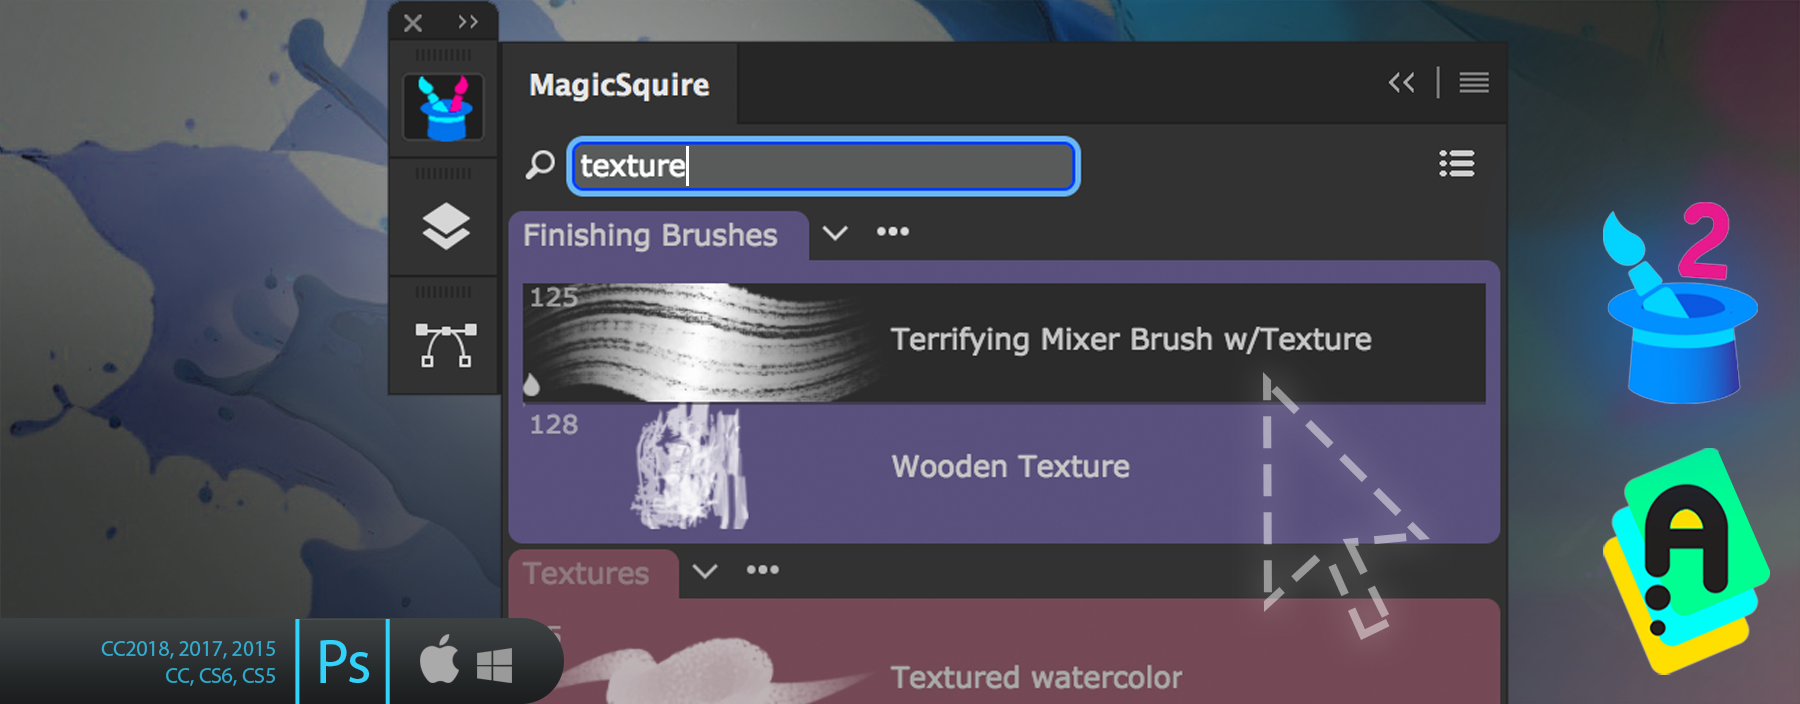 MagicSquire 2.2 live search for Tool Presets